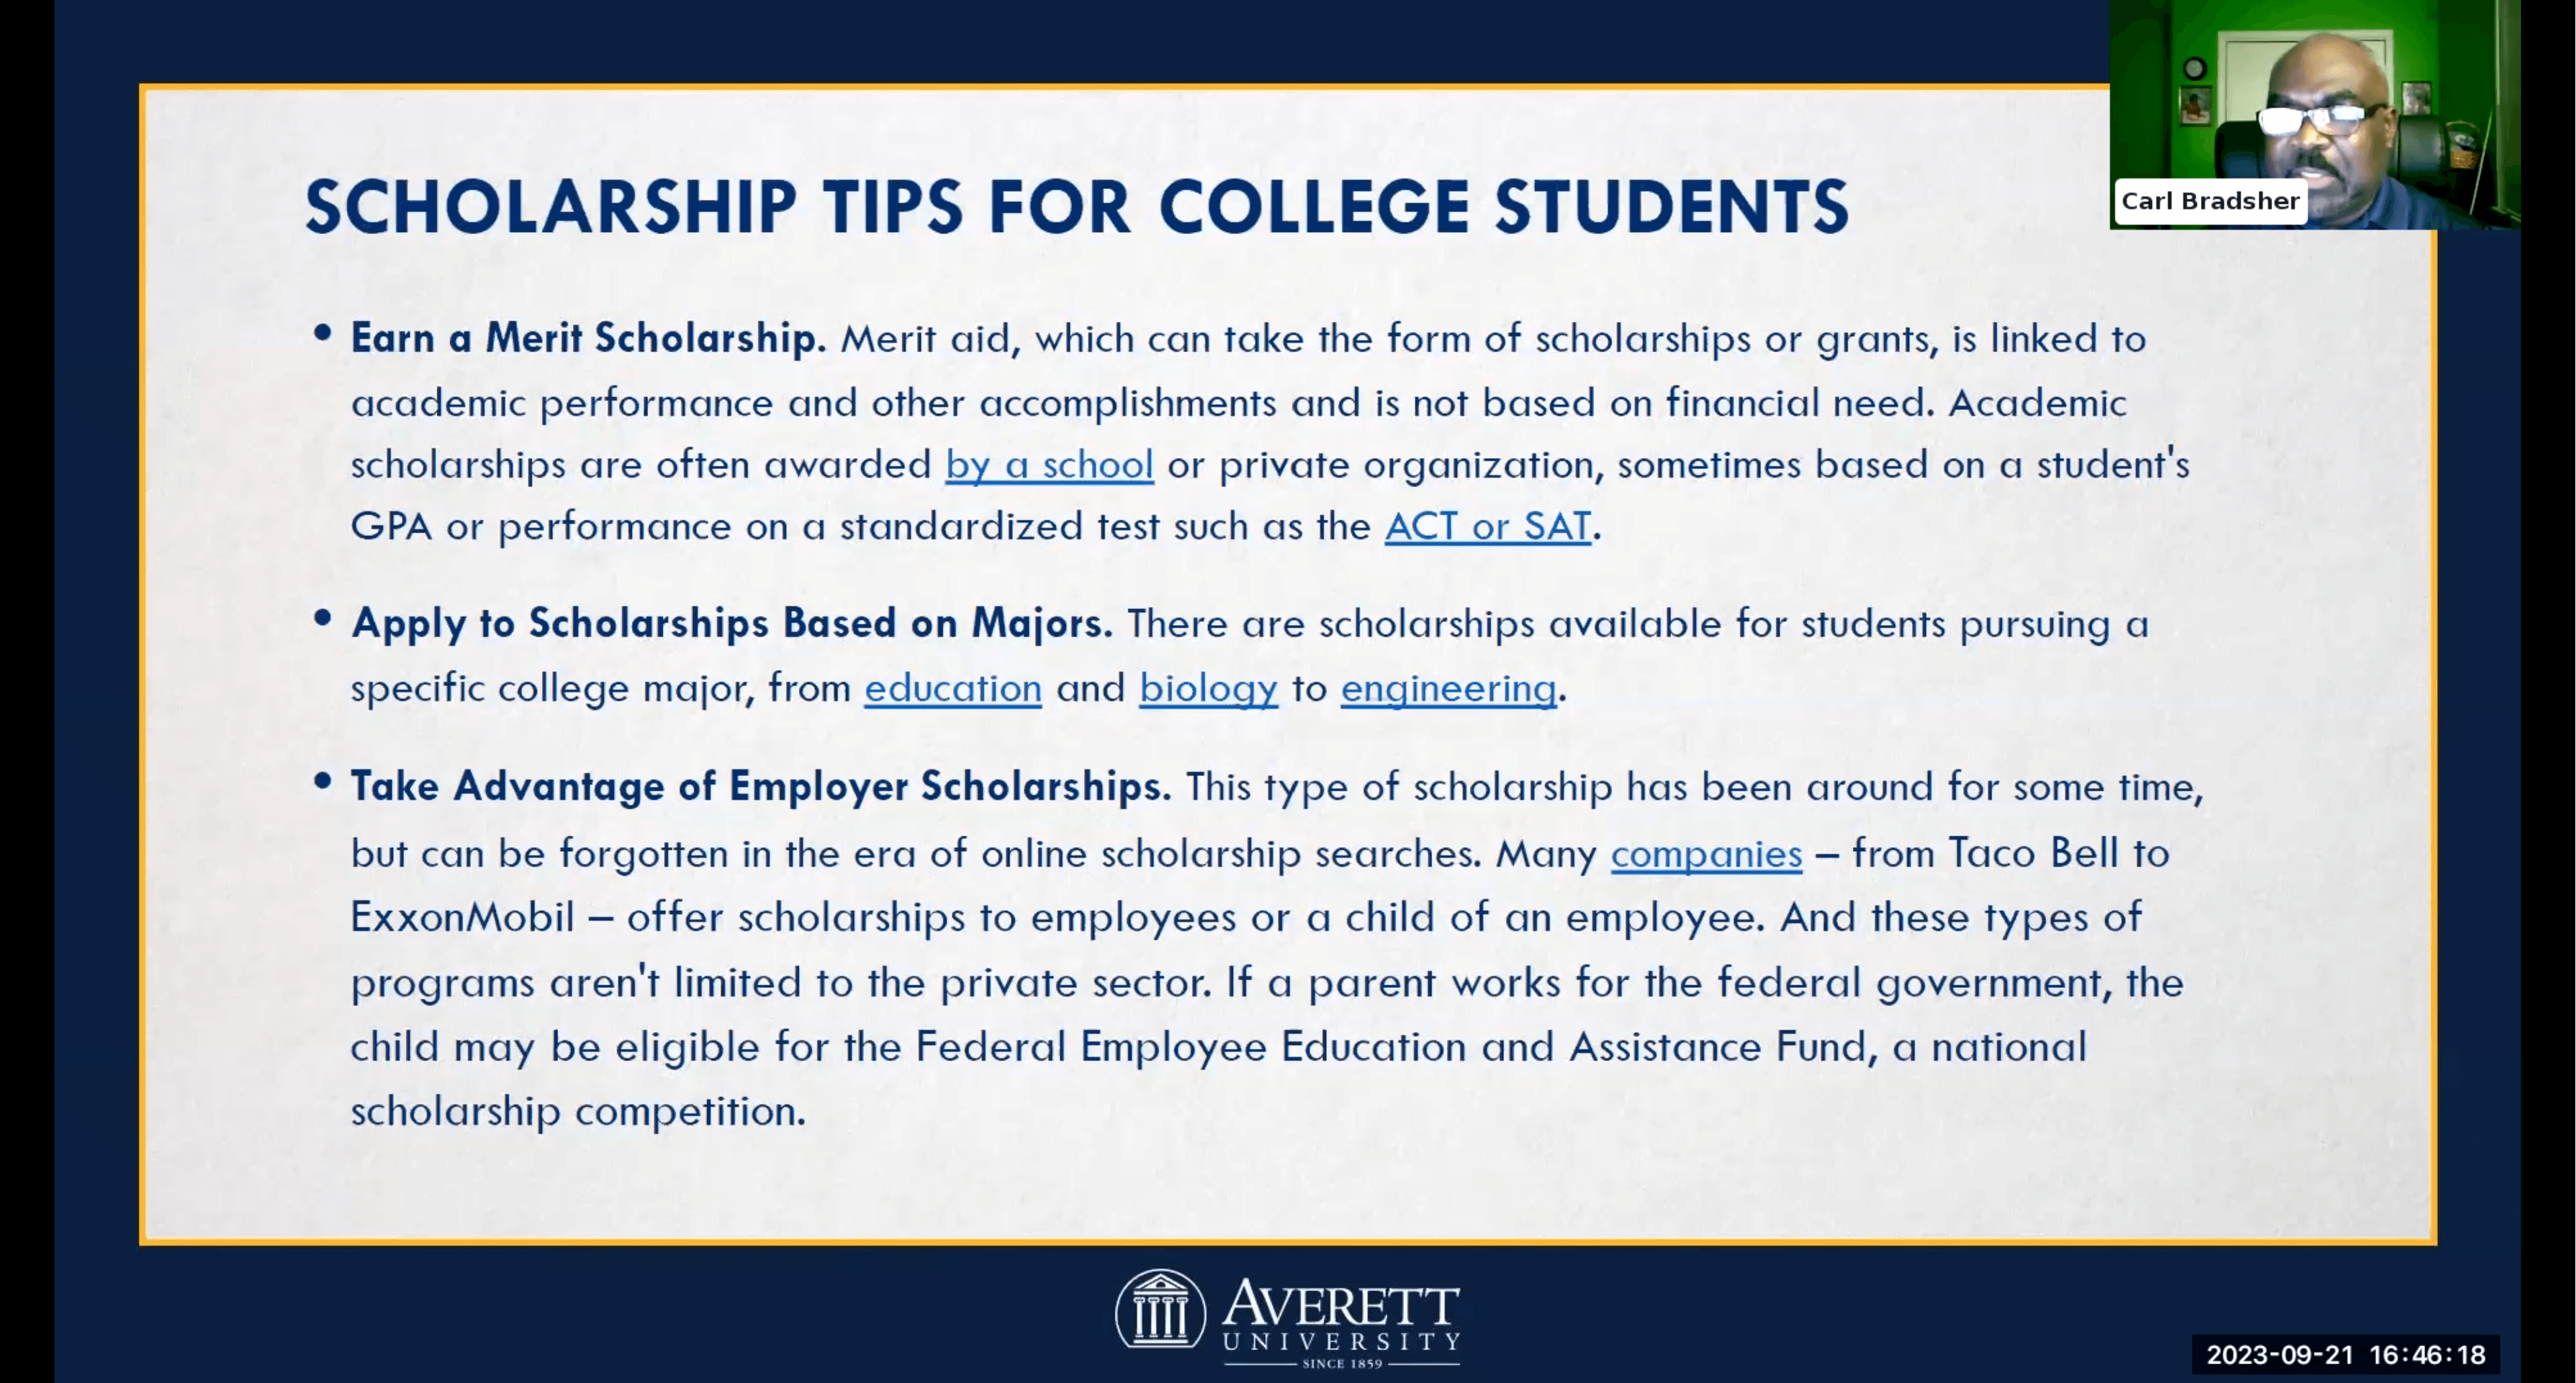 FAFSA is important, be ready in December. Universities will notify students when it's time to apply 